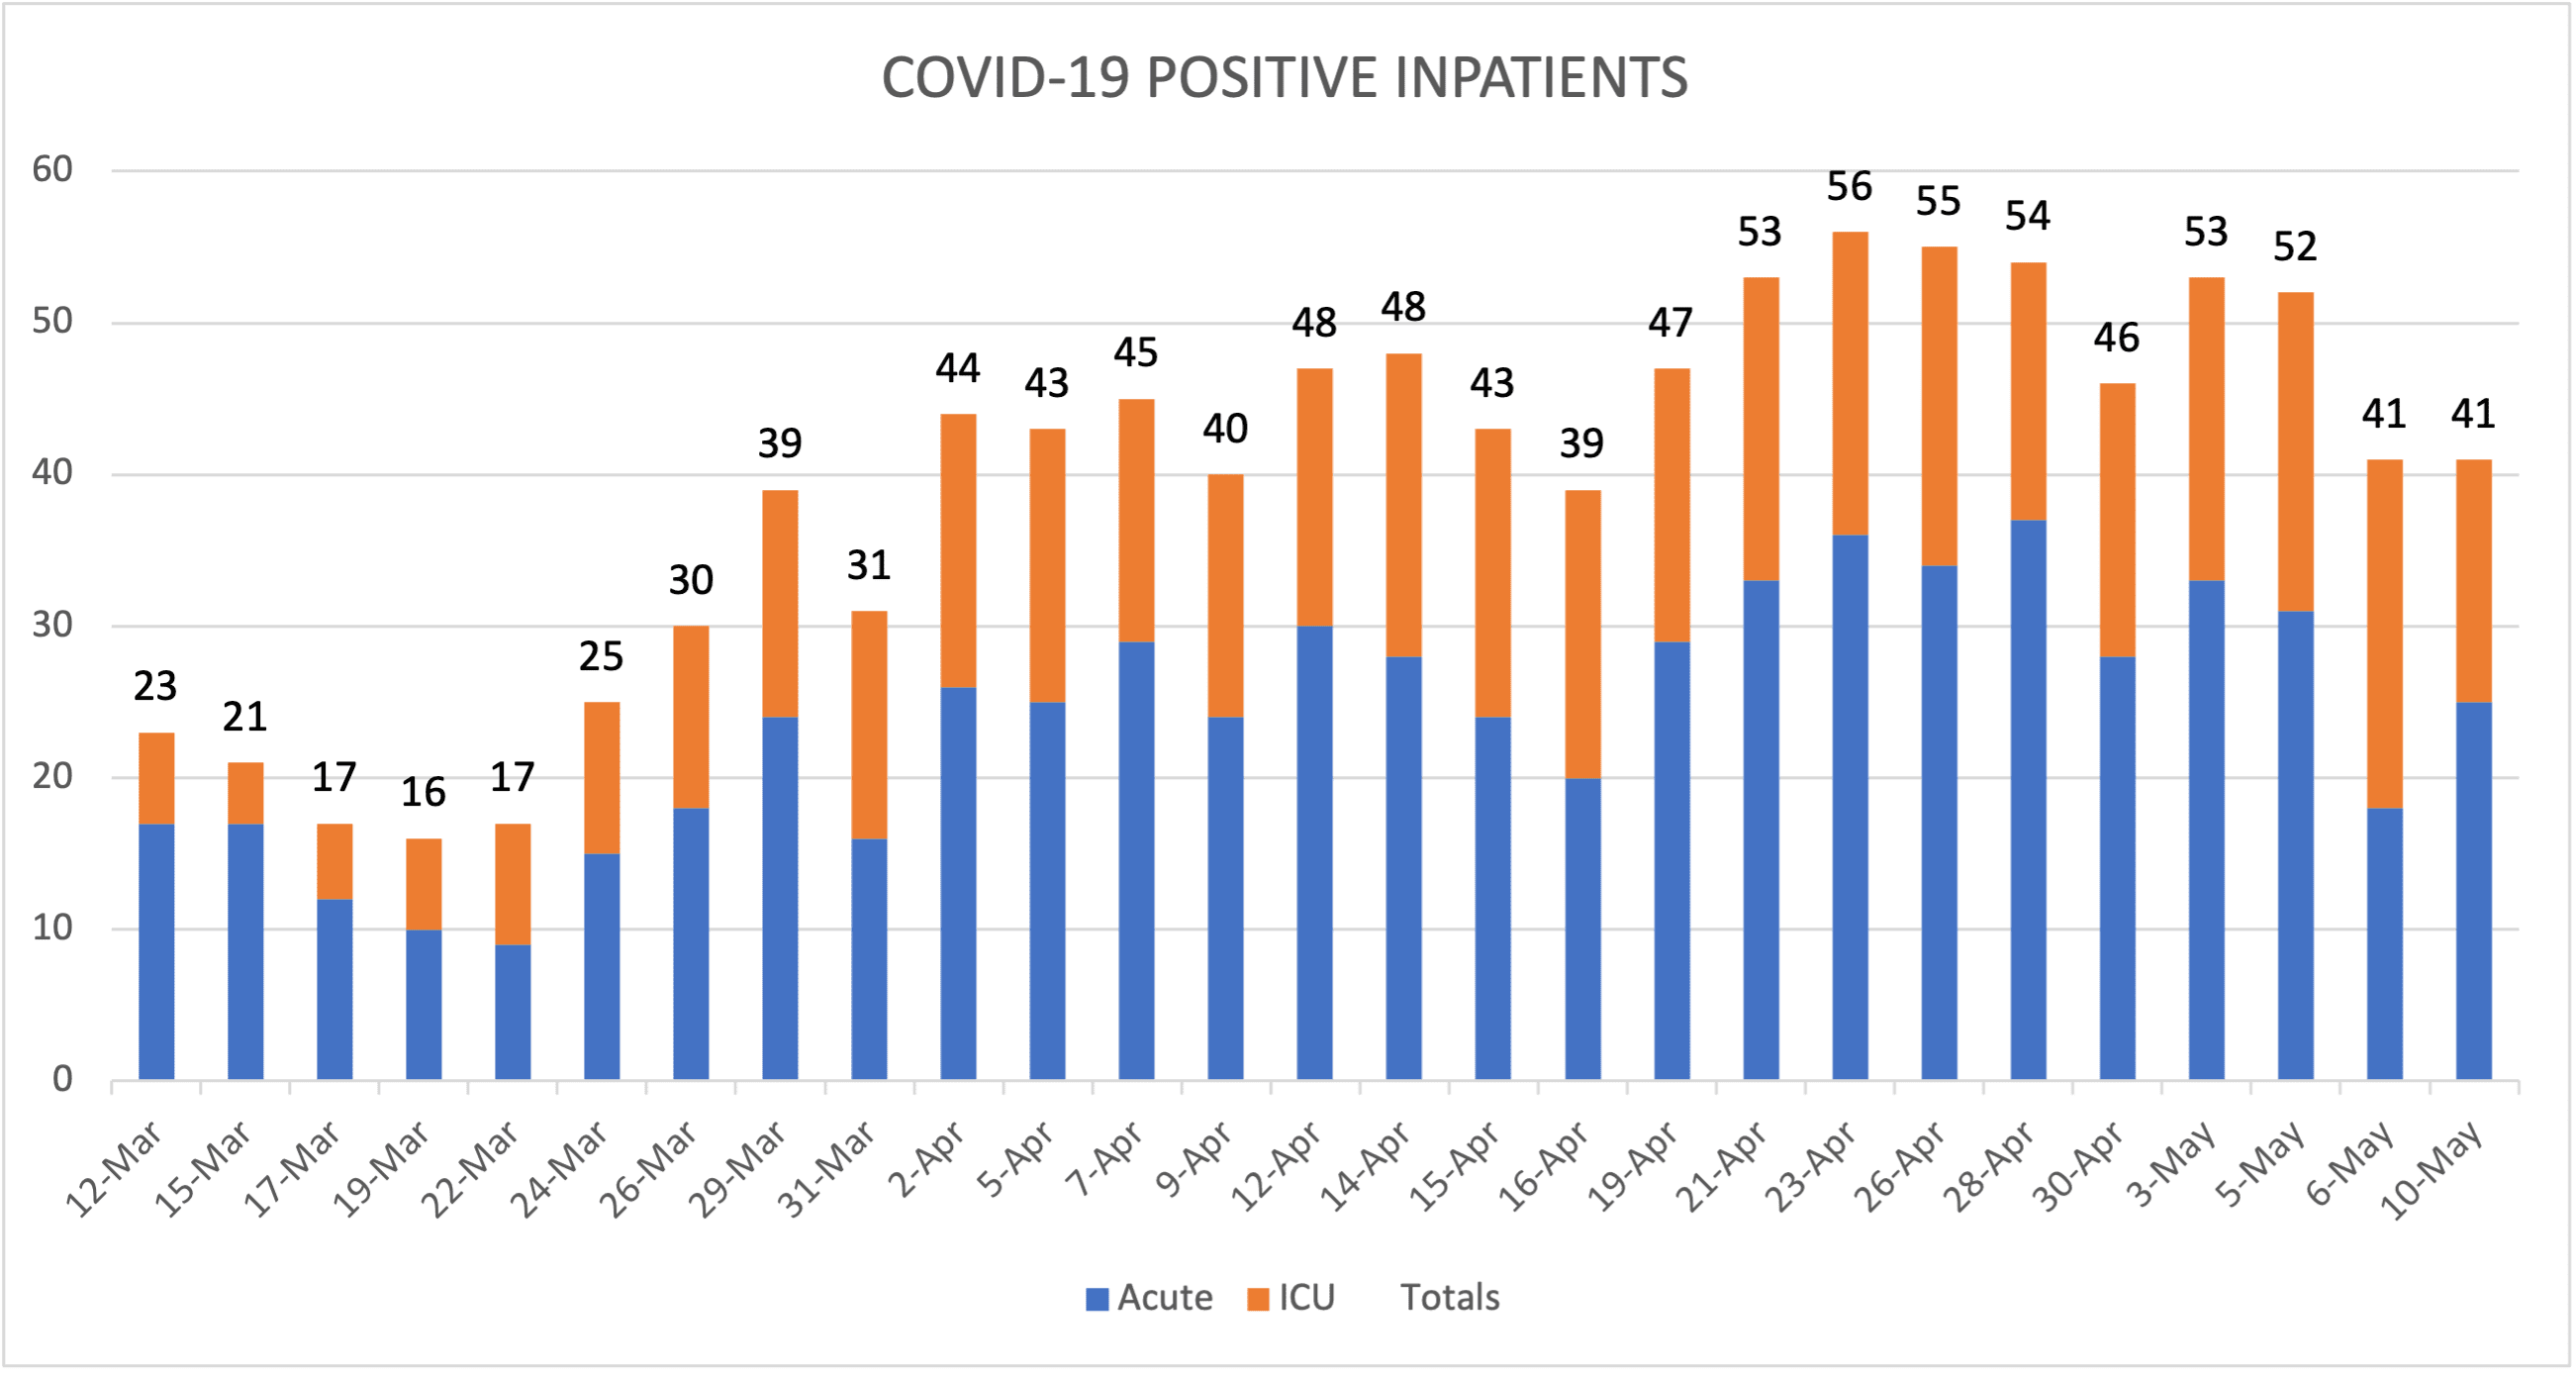 COVID-19 Positive Inpatients May 10 2021